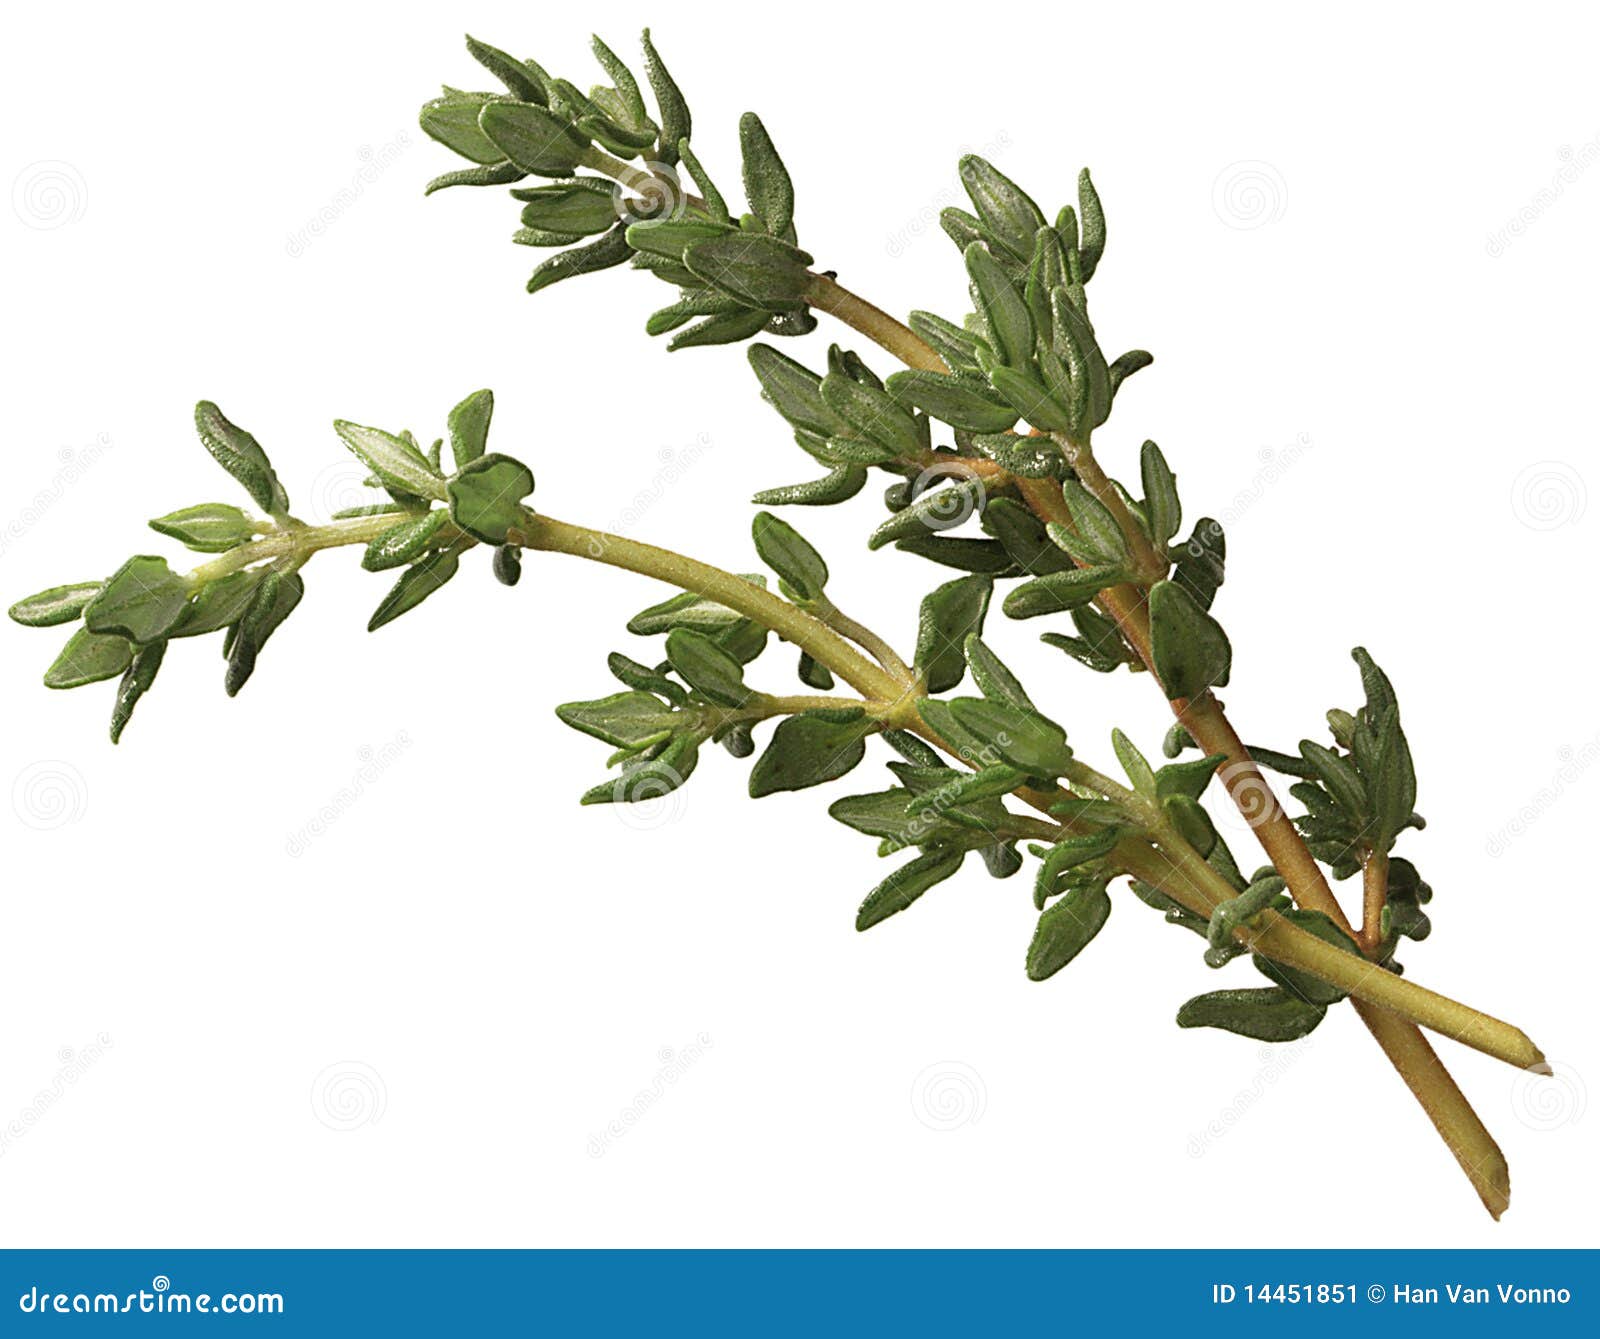 The Sprig of Thyme 